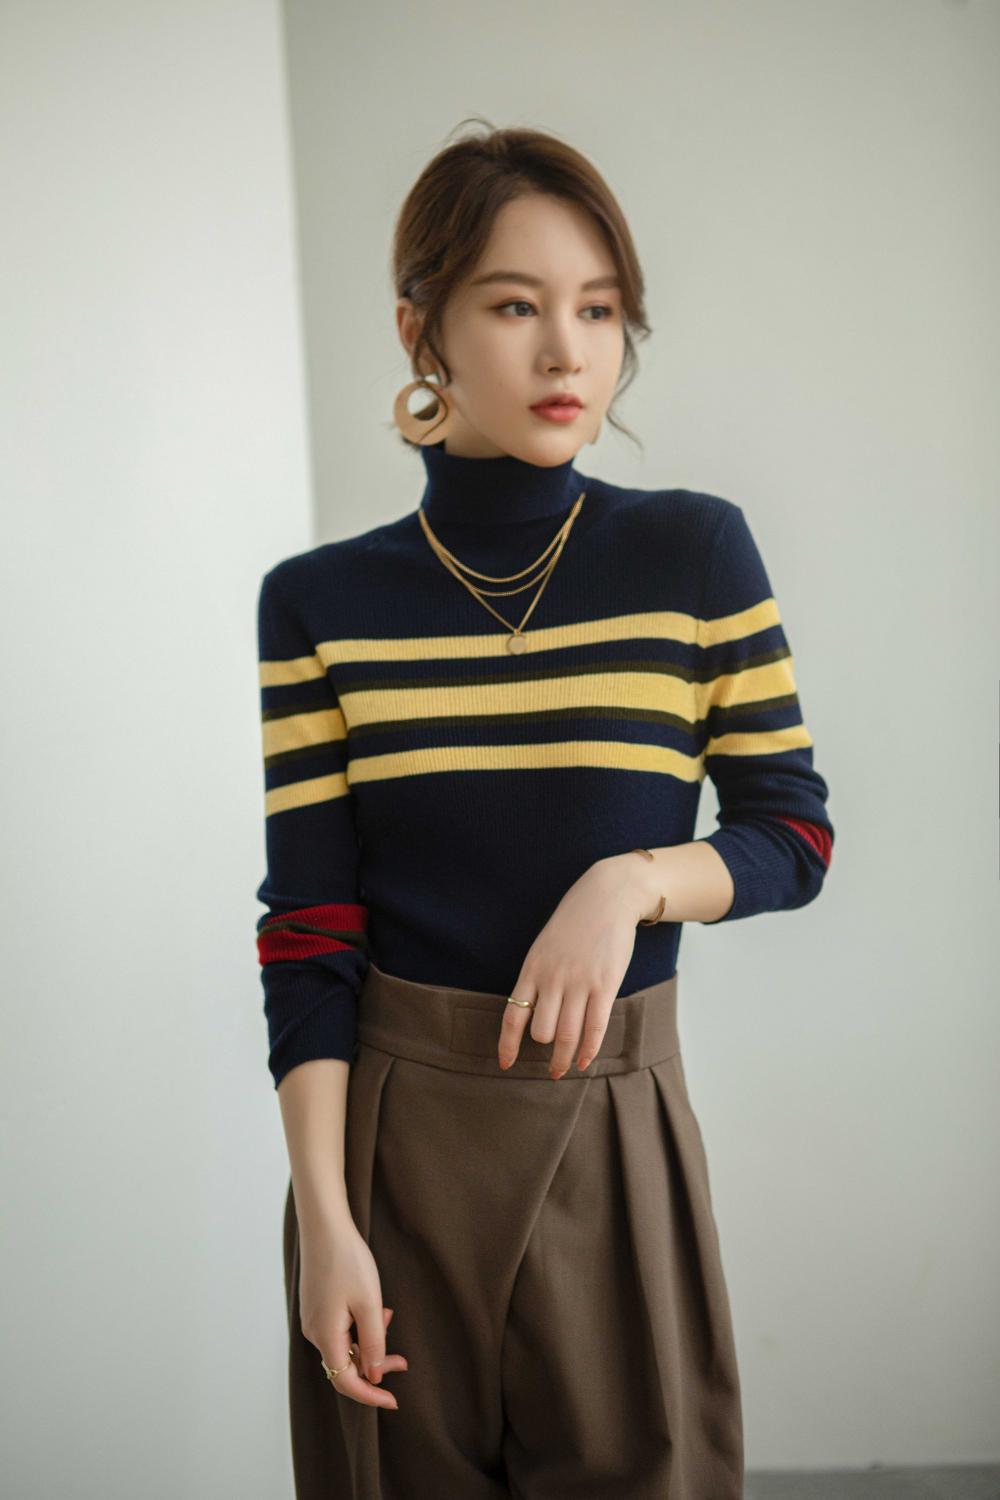 Women's blouse with a high collar and stripes